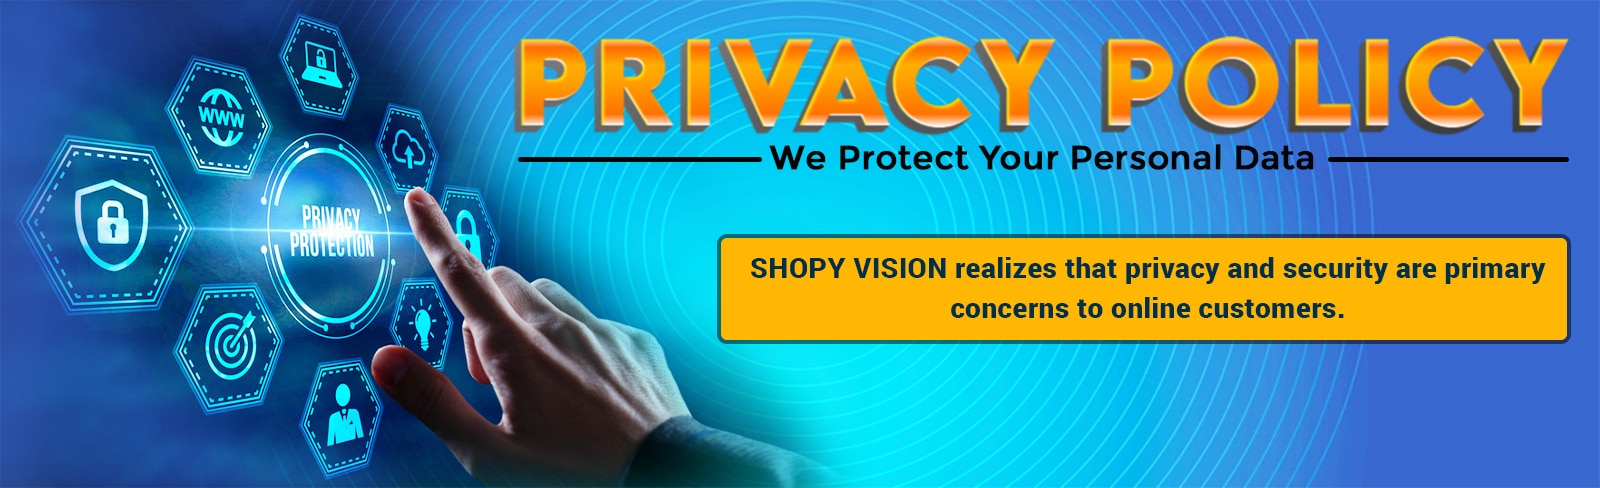 Privacy policy Desktop Banner